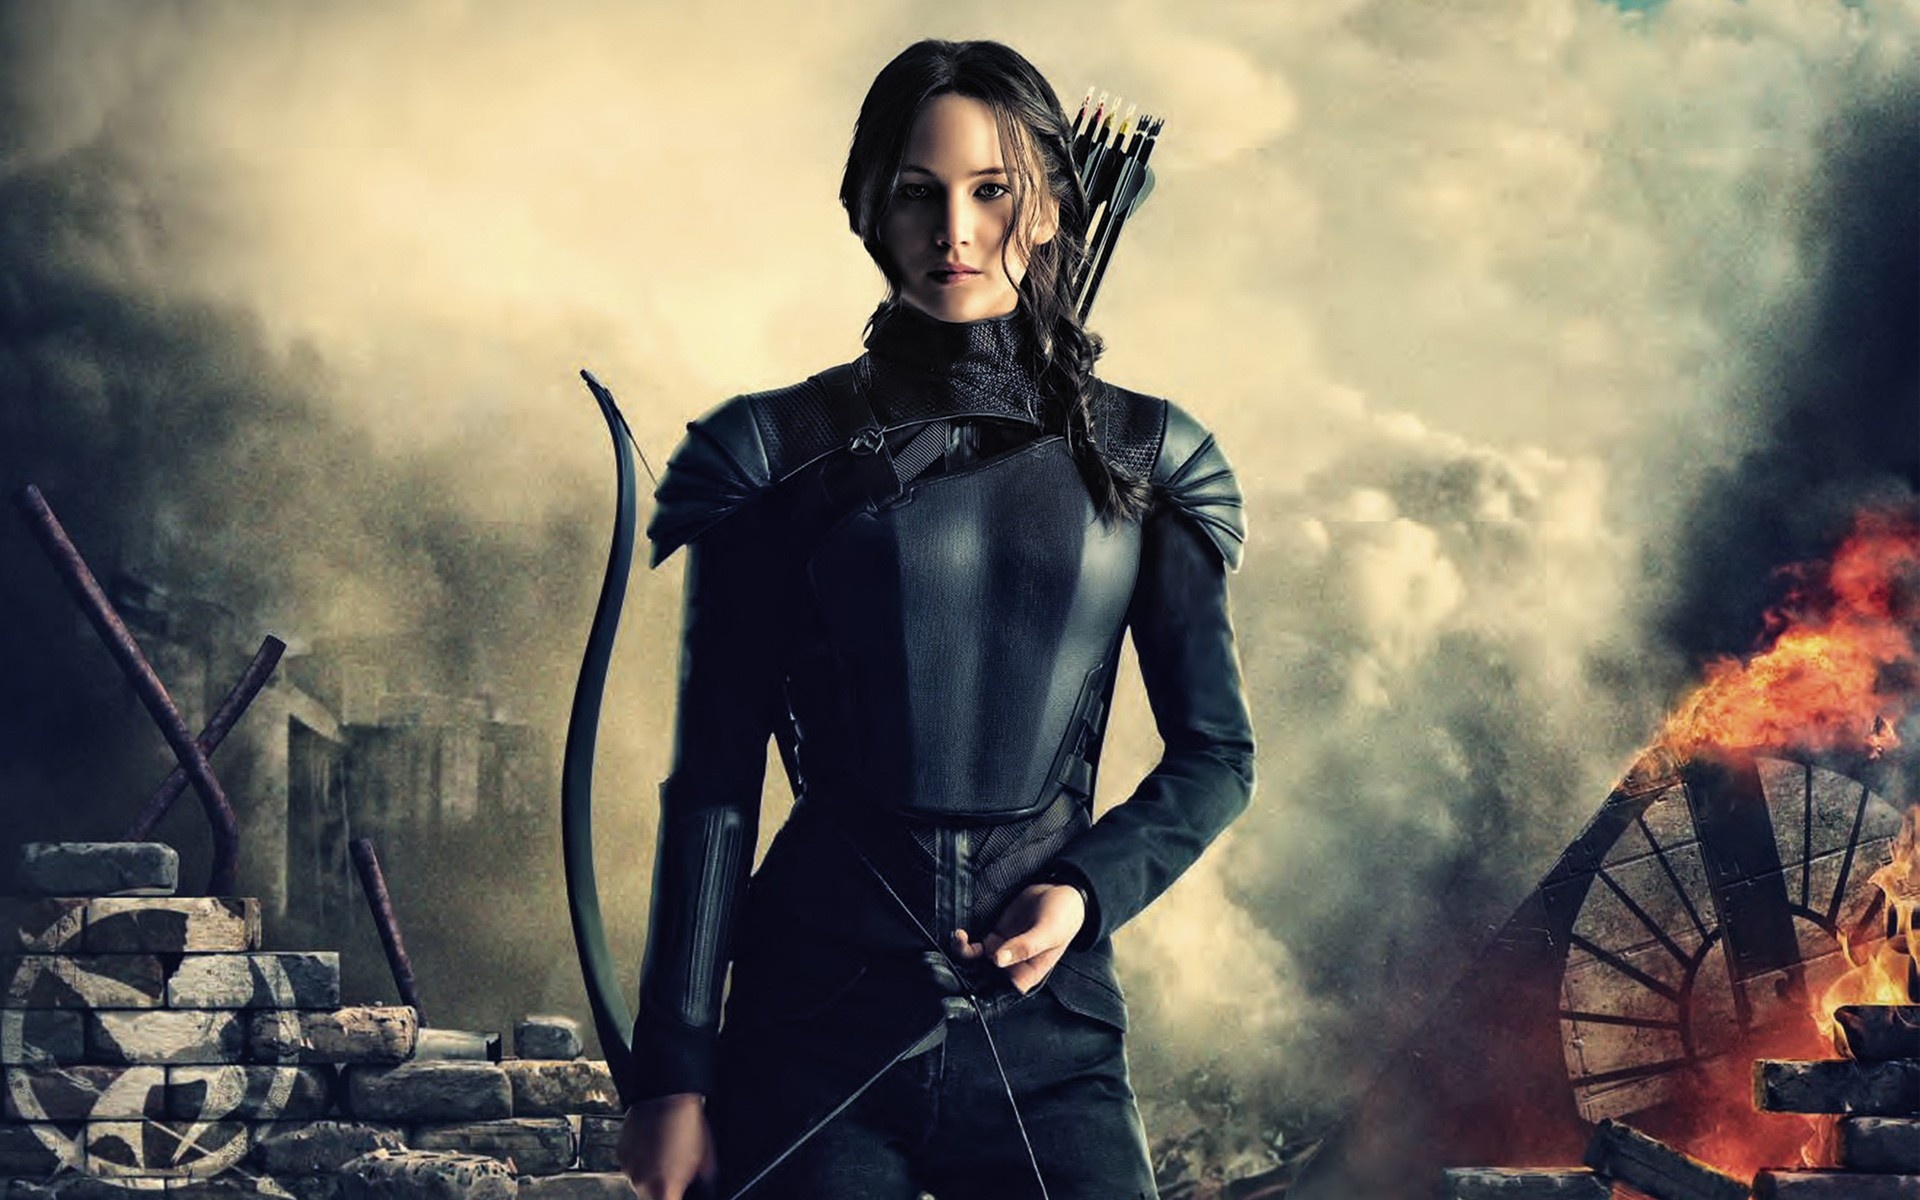 Hunger Games: The final book, Mockingjay, was split into two movies, Katniss. 1920x1200 HD Wallpaper.